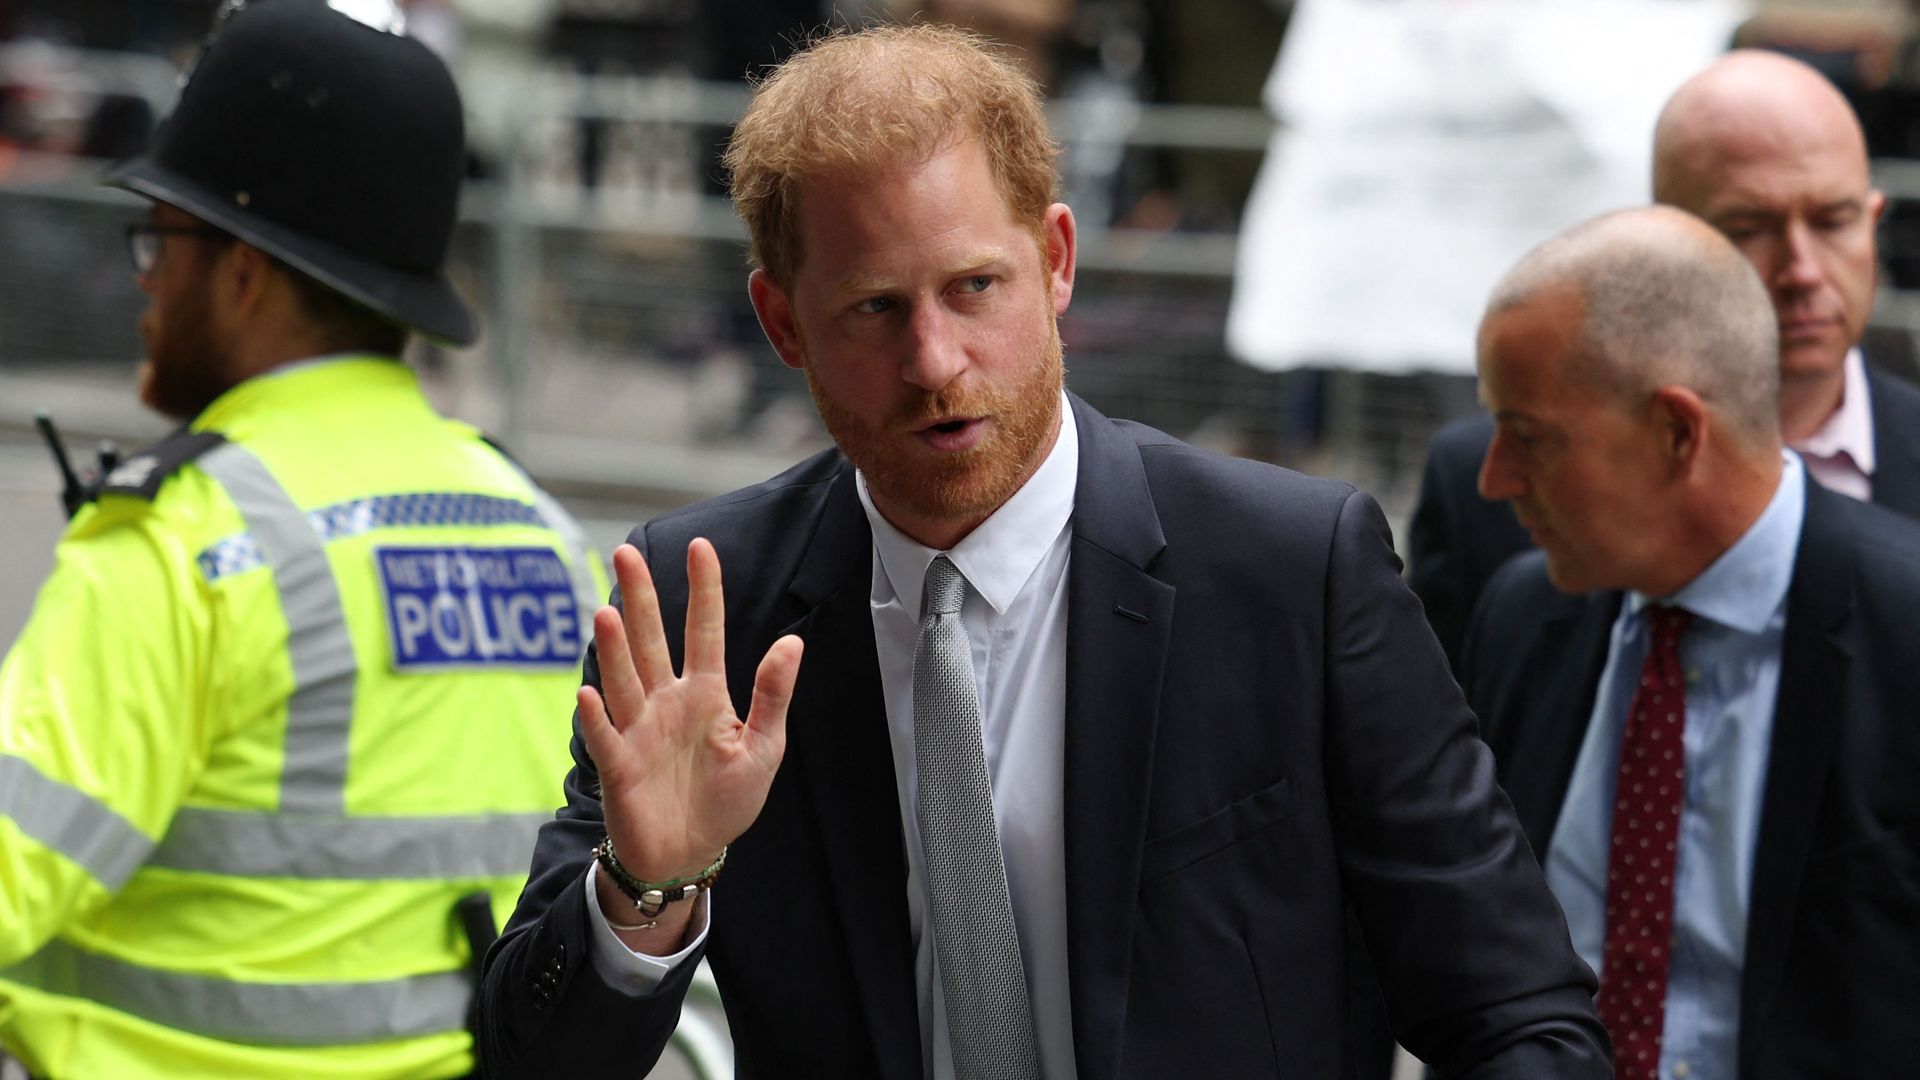 Prince Harry waves as he arrives at High Court